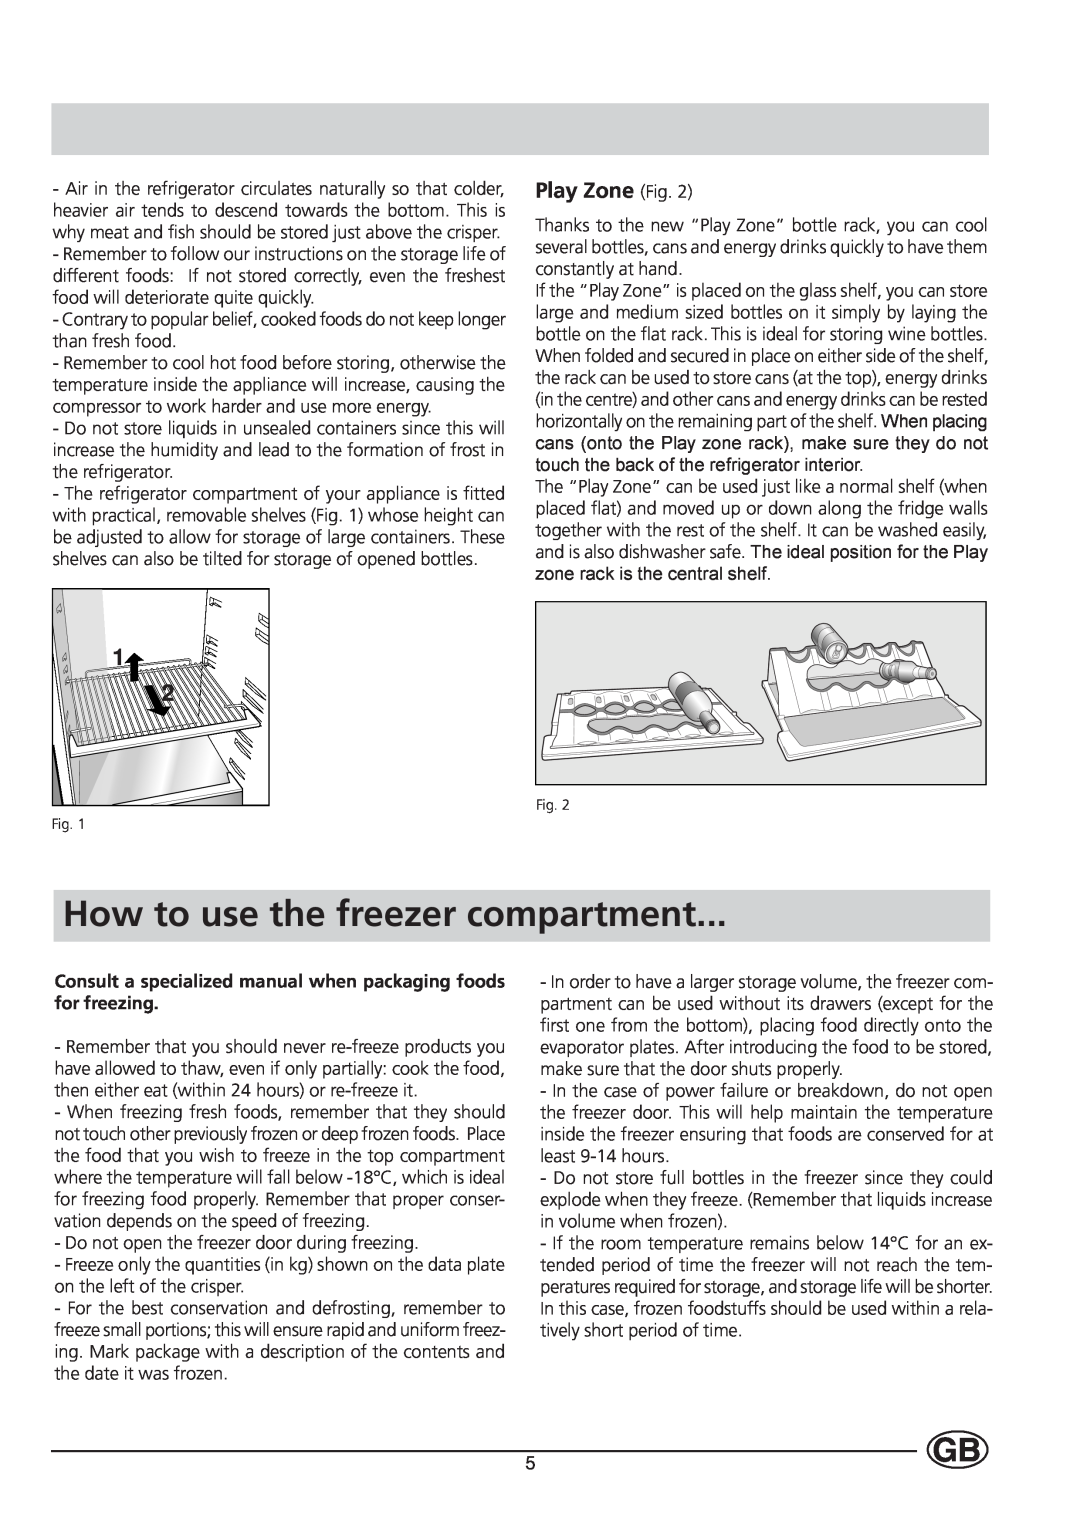 Indesit BA 139 PS manual How to use the freezer compartment, Play Zone Fig 